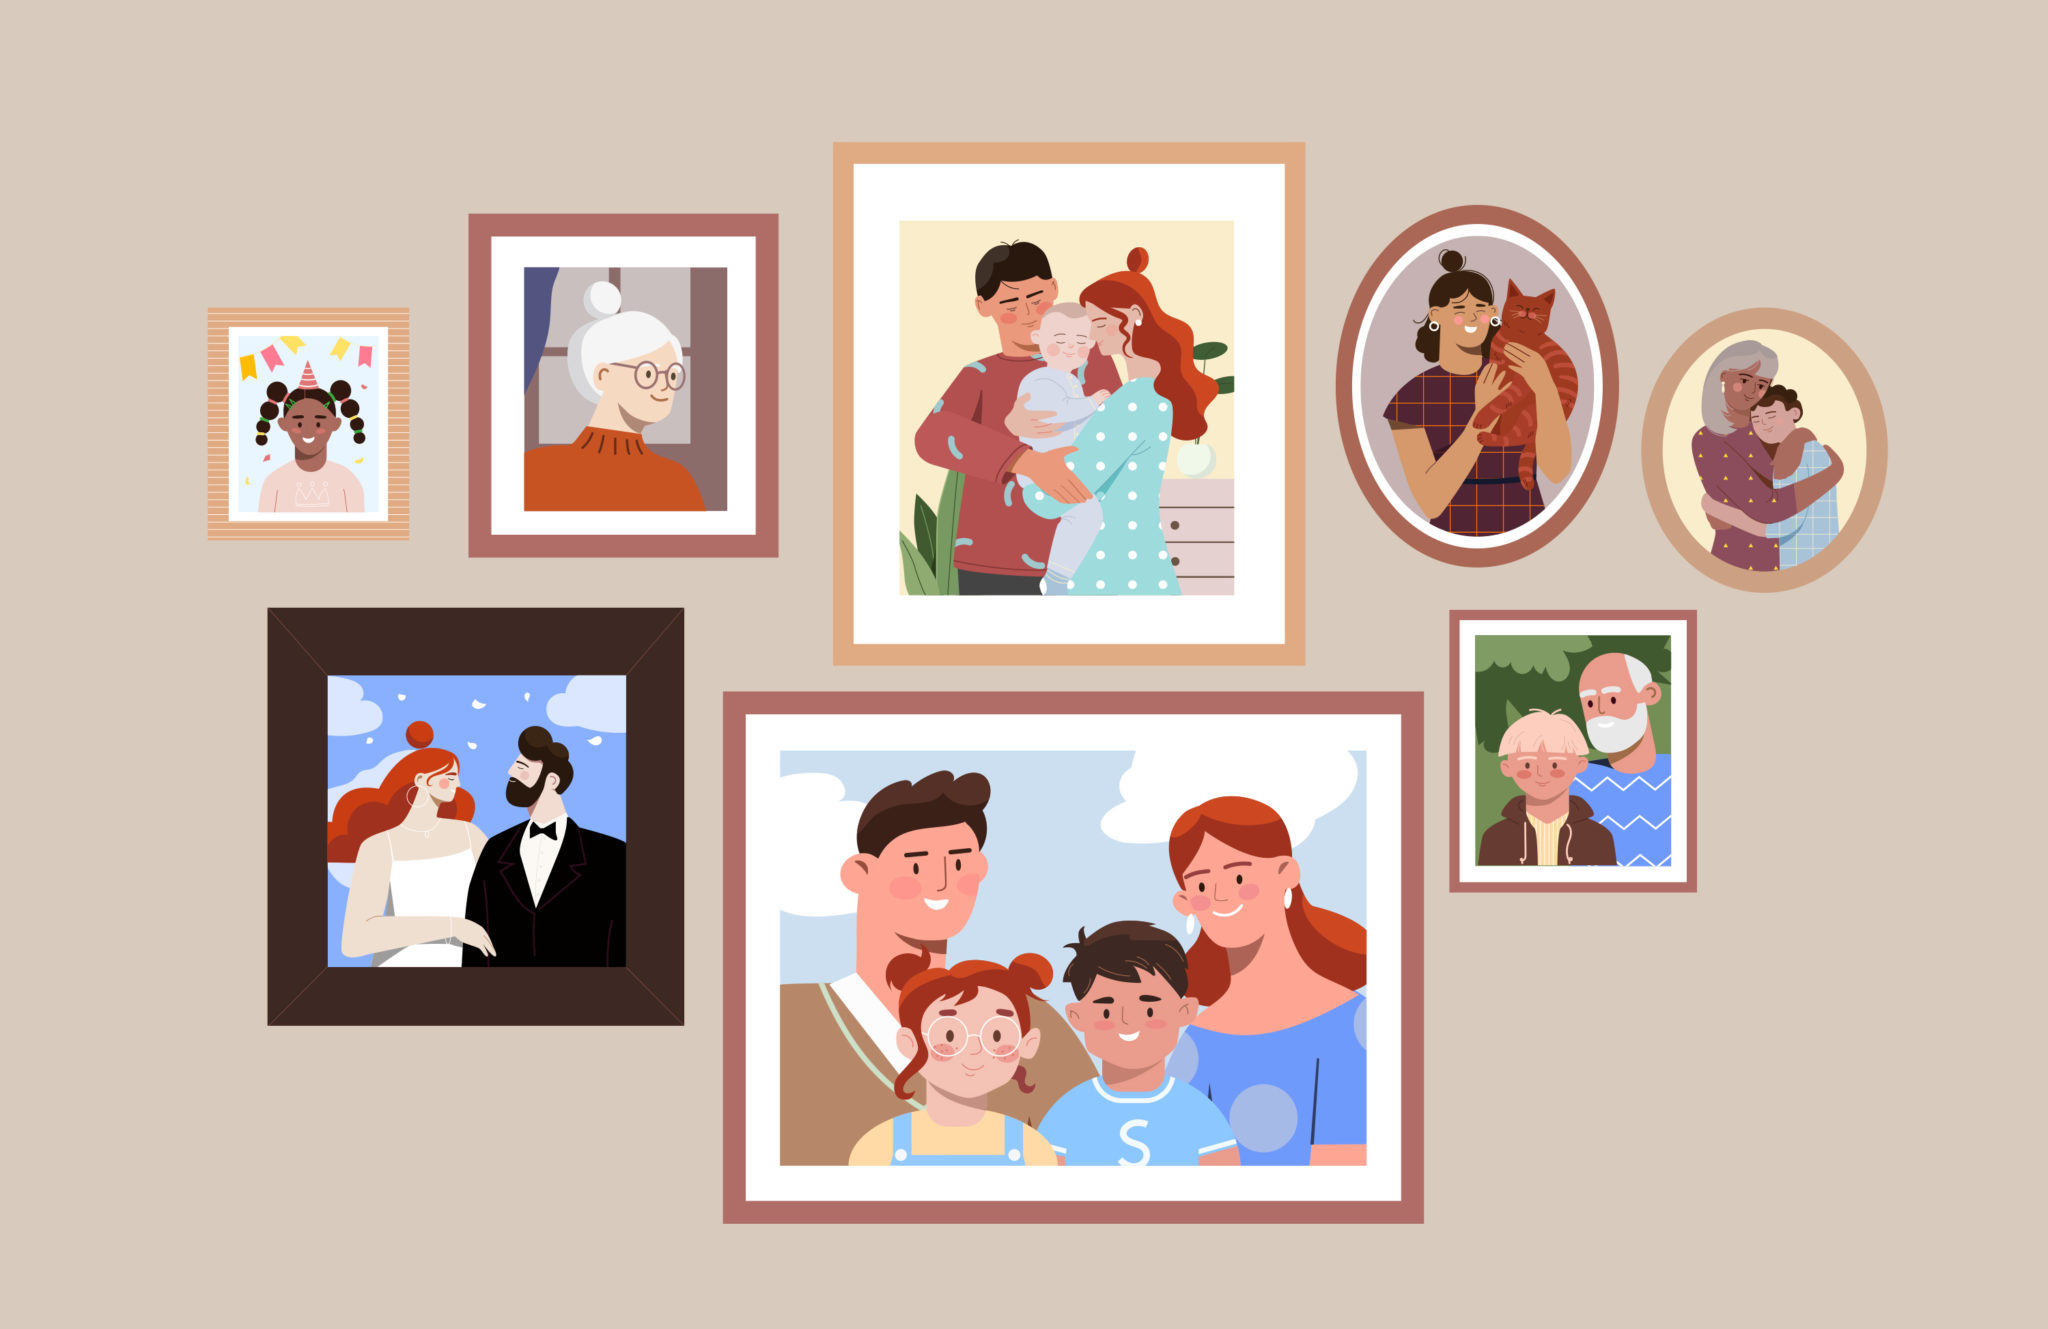 An illustration showing different families